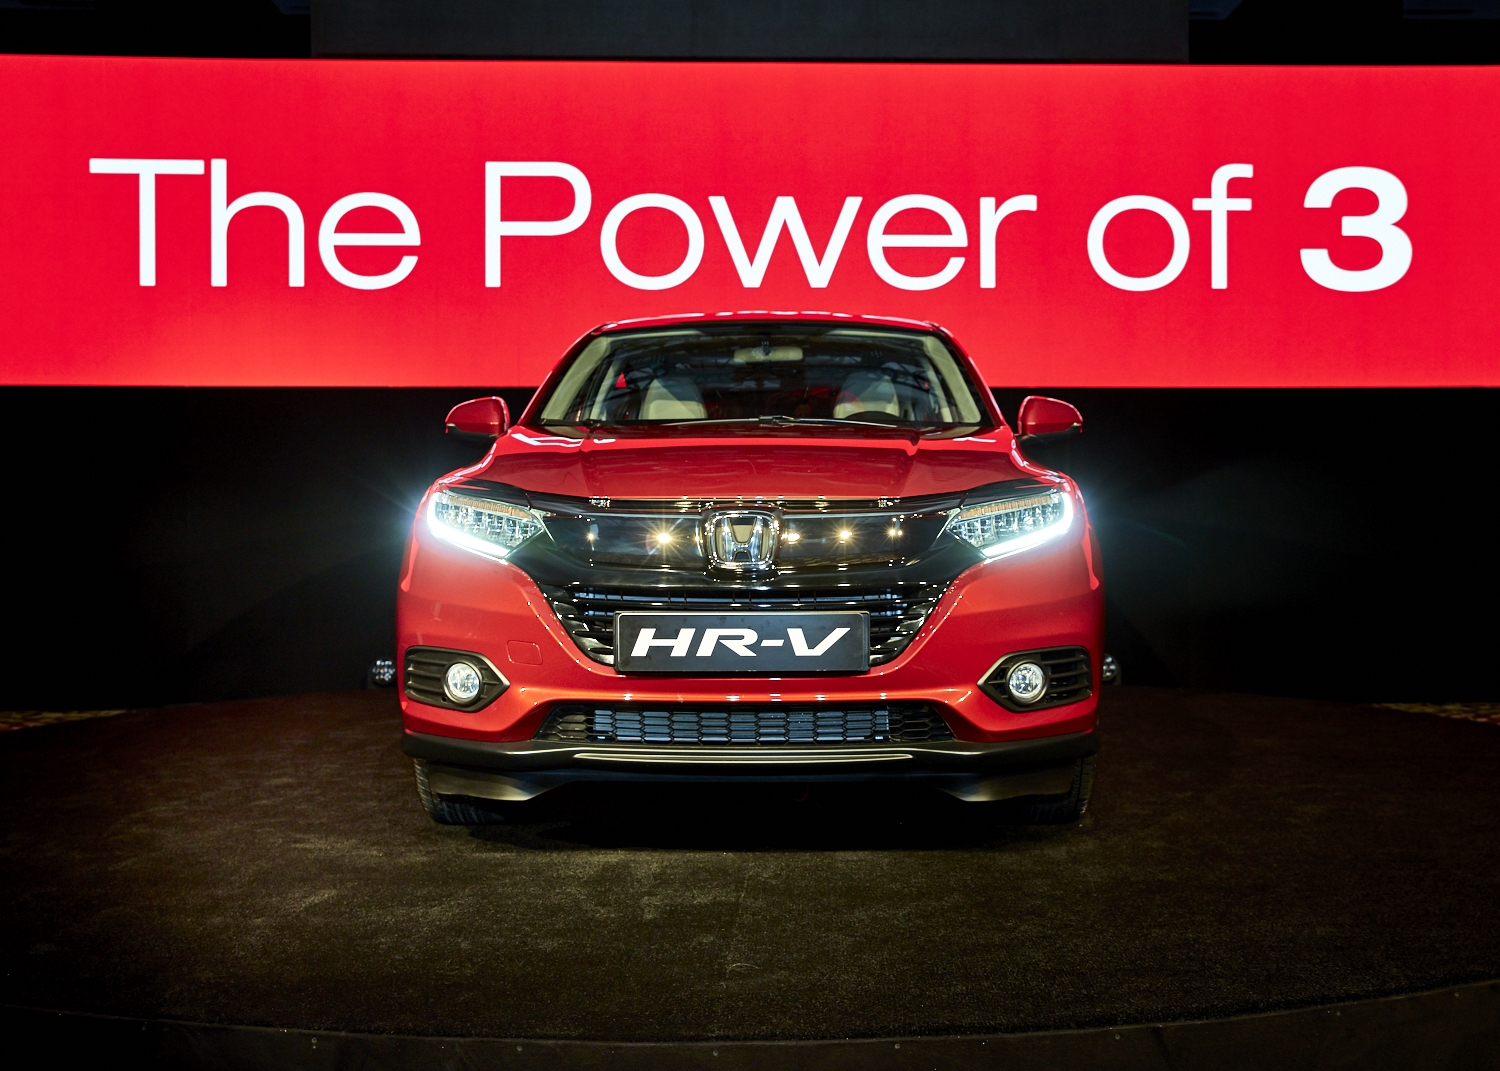 Honda Launches Brand New Sleek Crossover, HR-V to Complete ‘Power of 3’ SUV Range